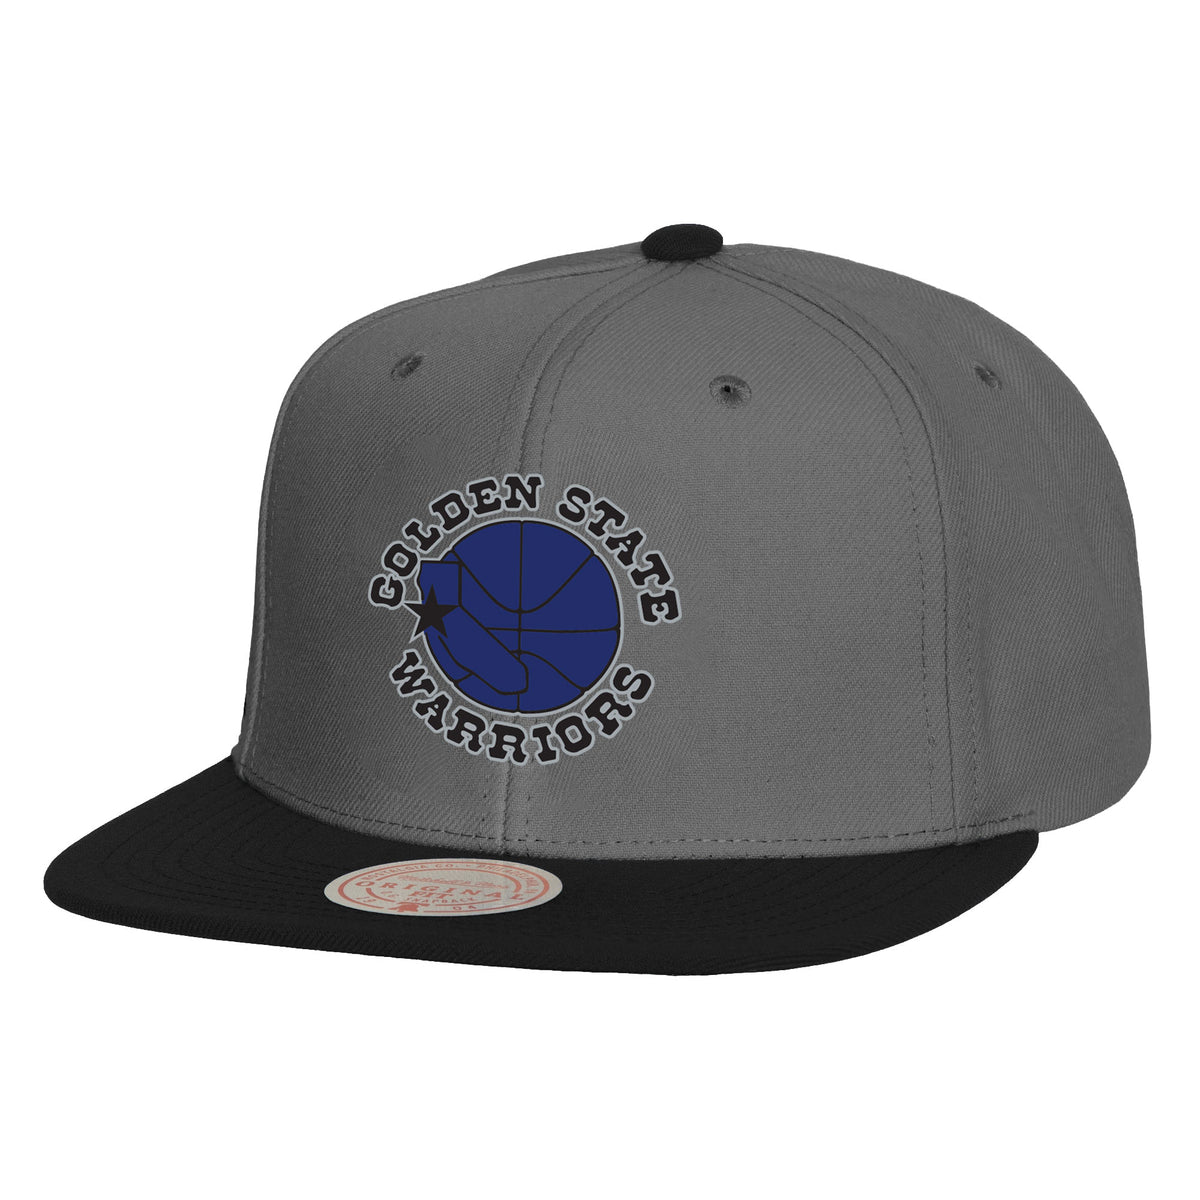 Mitchell & Ness Storm Front Snapback Golden State Warriors